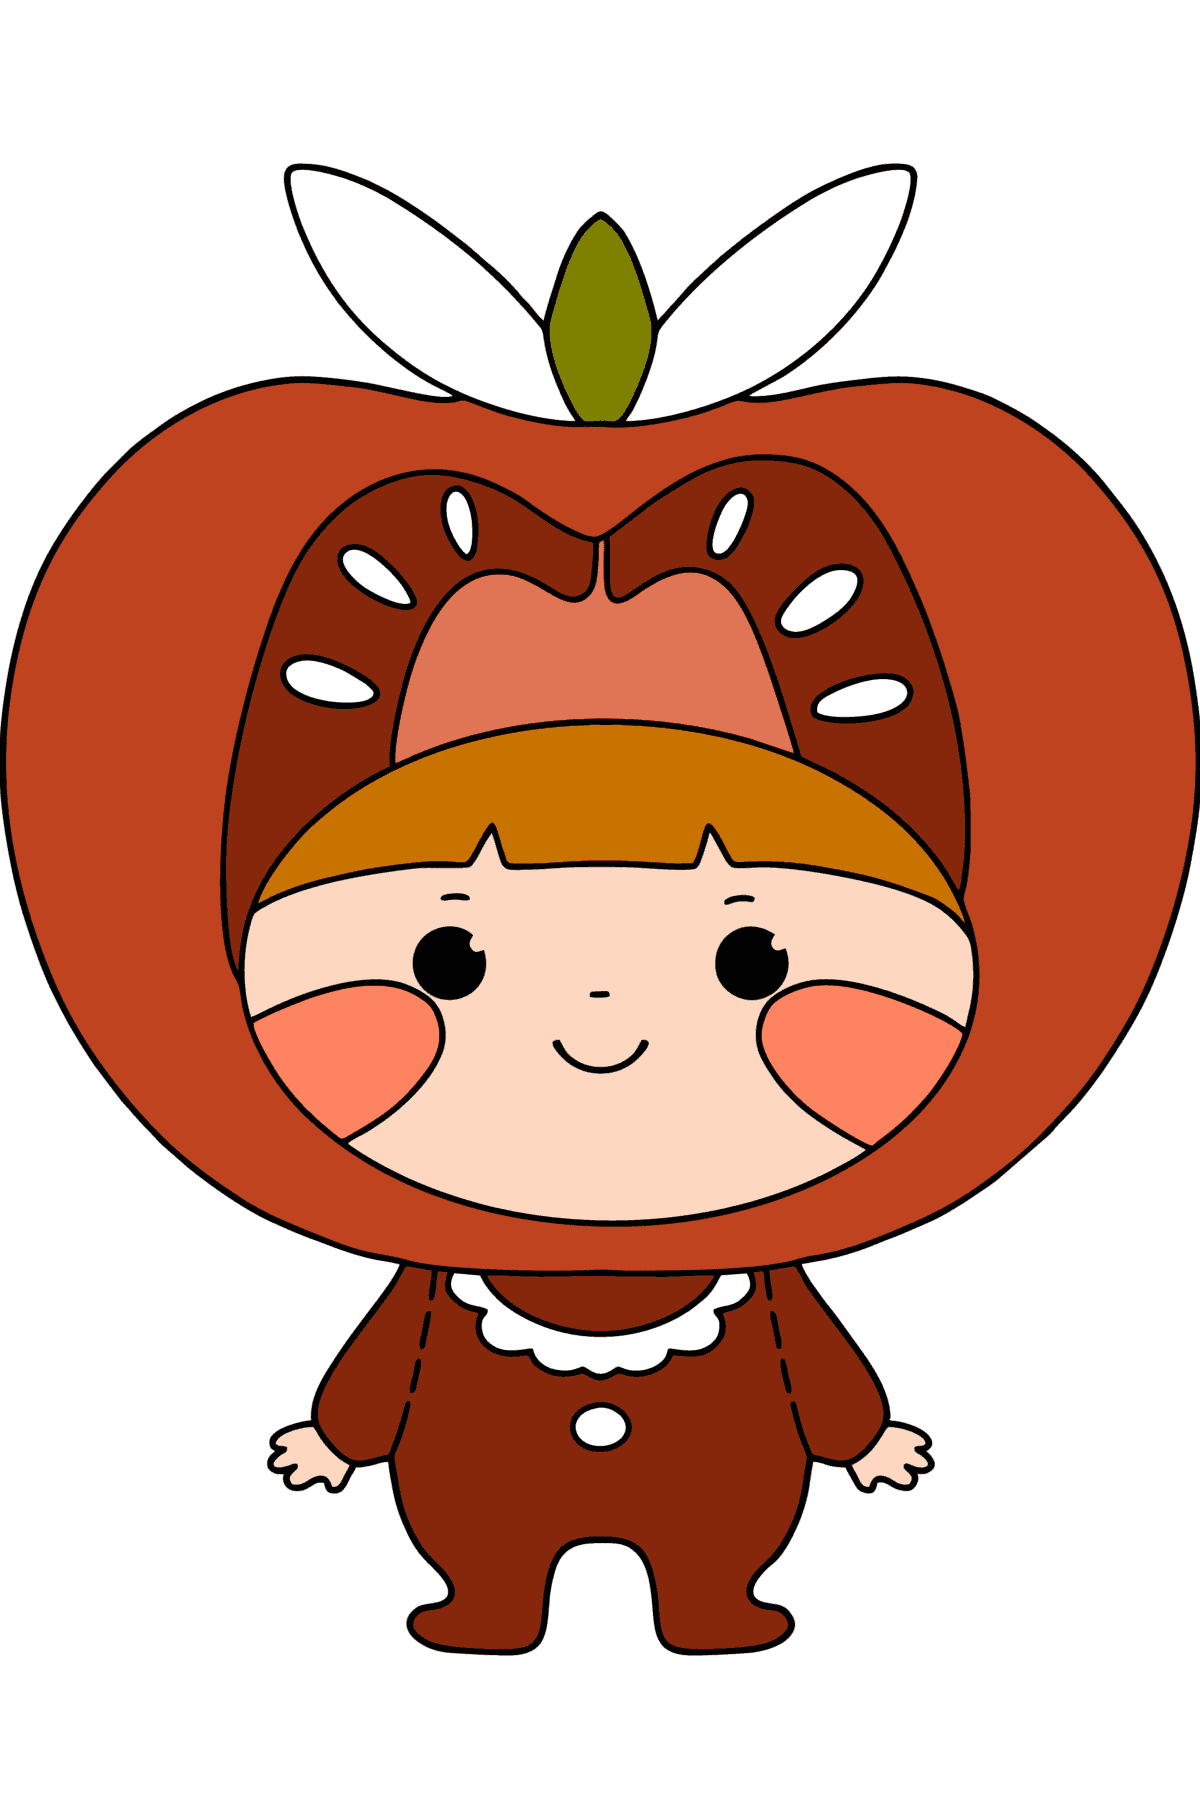 Tomato costume сoloring page - Coloring Pages for Kids